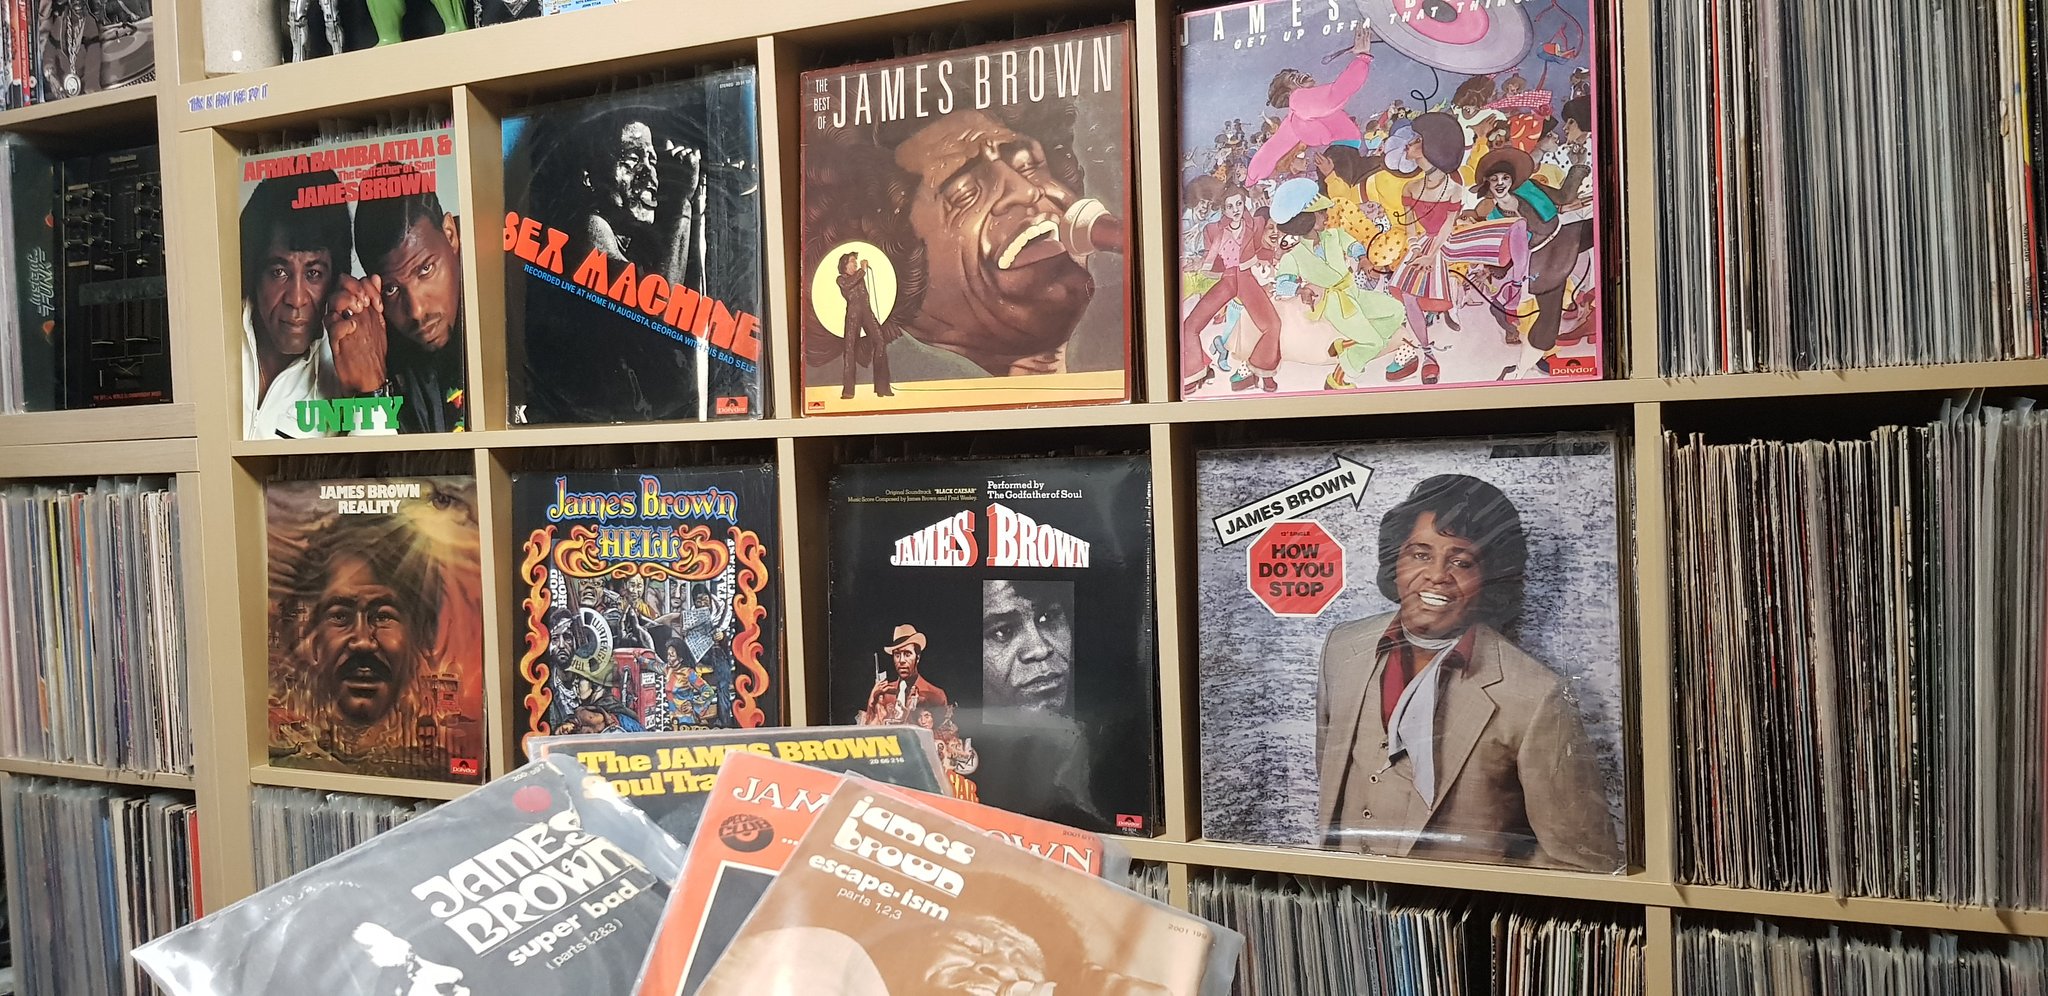 Happy BDay Mr Dynamite 
JAMES BROWN Thank you for you music    